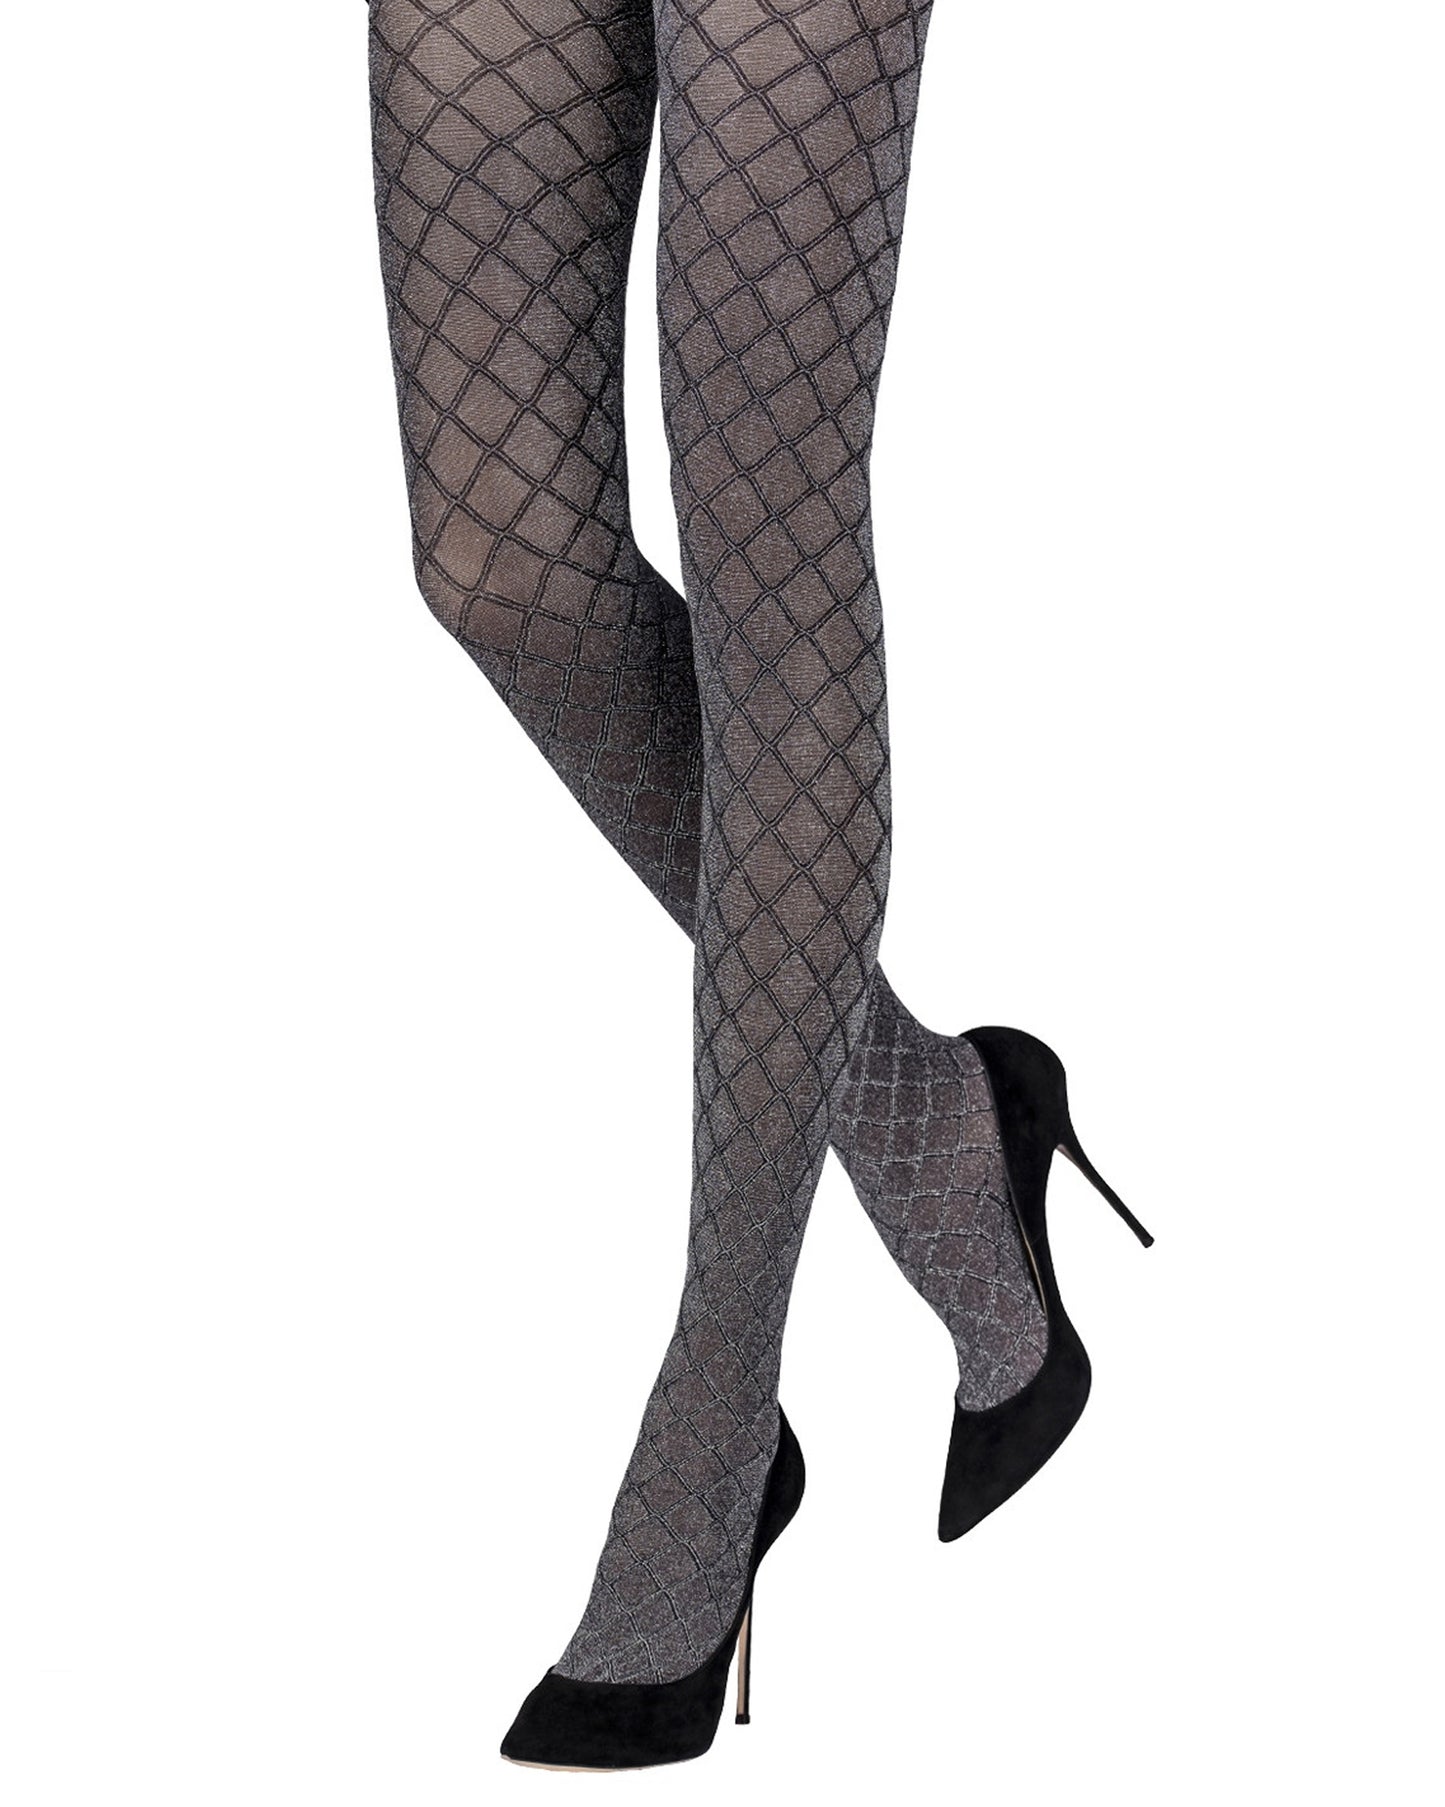 Emilio Cavallini Metallized Diamond Tights - Semi opaque black tights with an all over enclosed fishnet diamond style textured pattern with sparkly silver lamé throughout, perfect for party season.